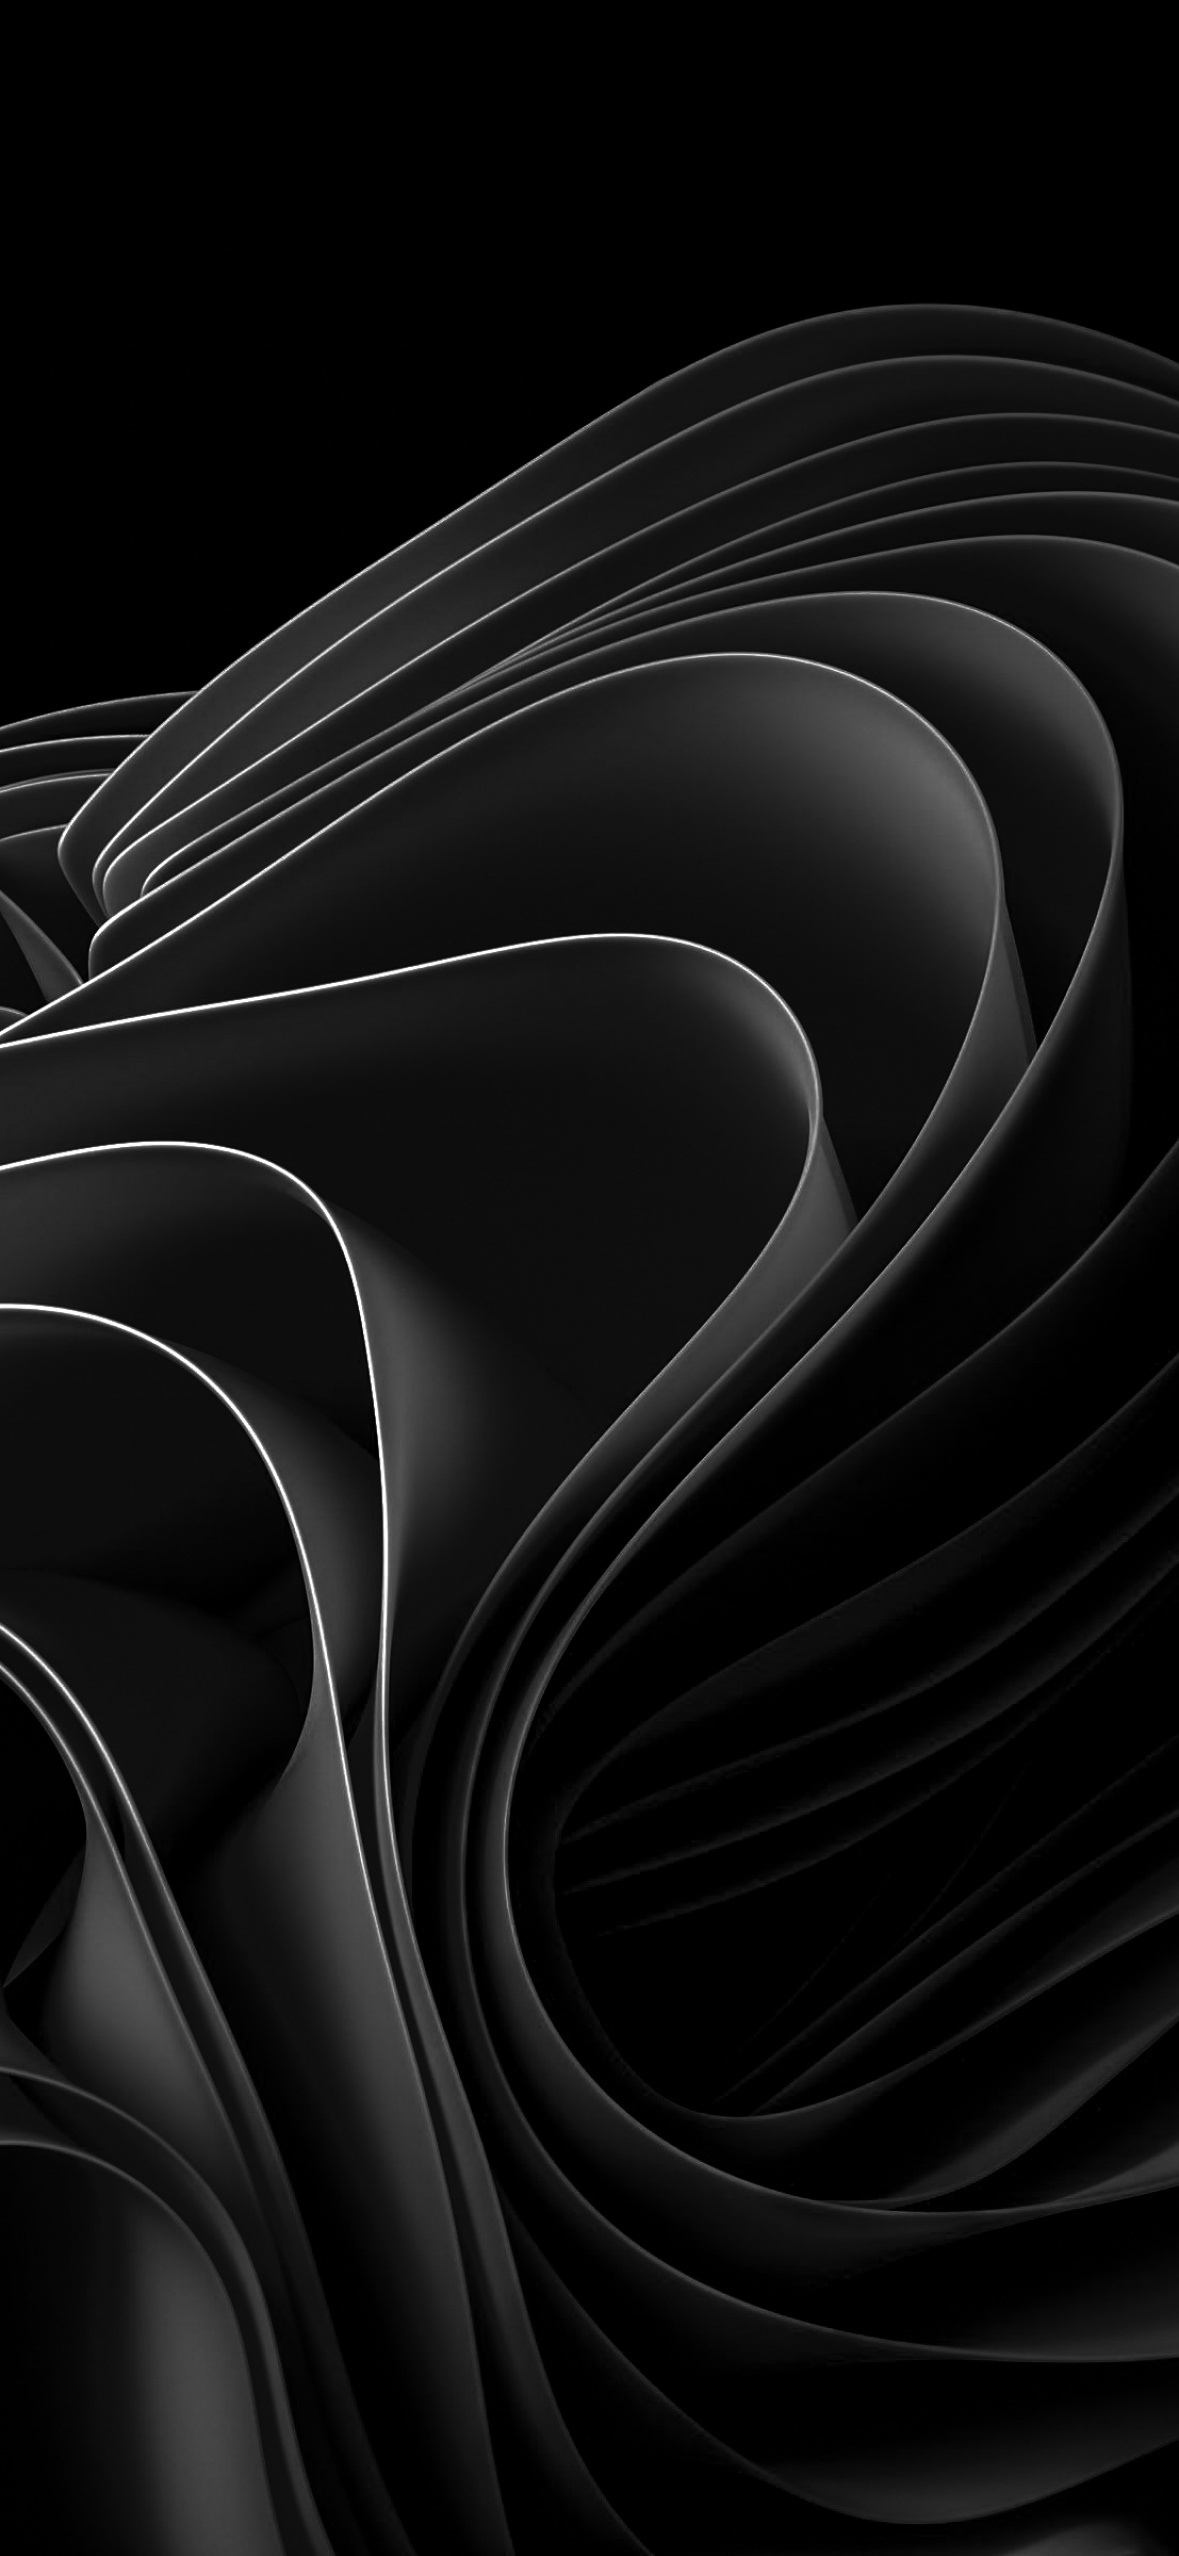 Black And Color Wallpaper For Mobile  516x960 Wallpaper  teahubio